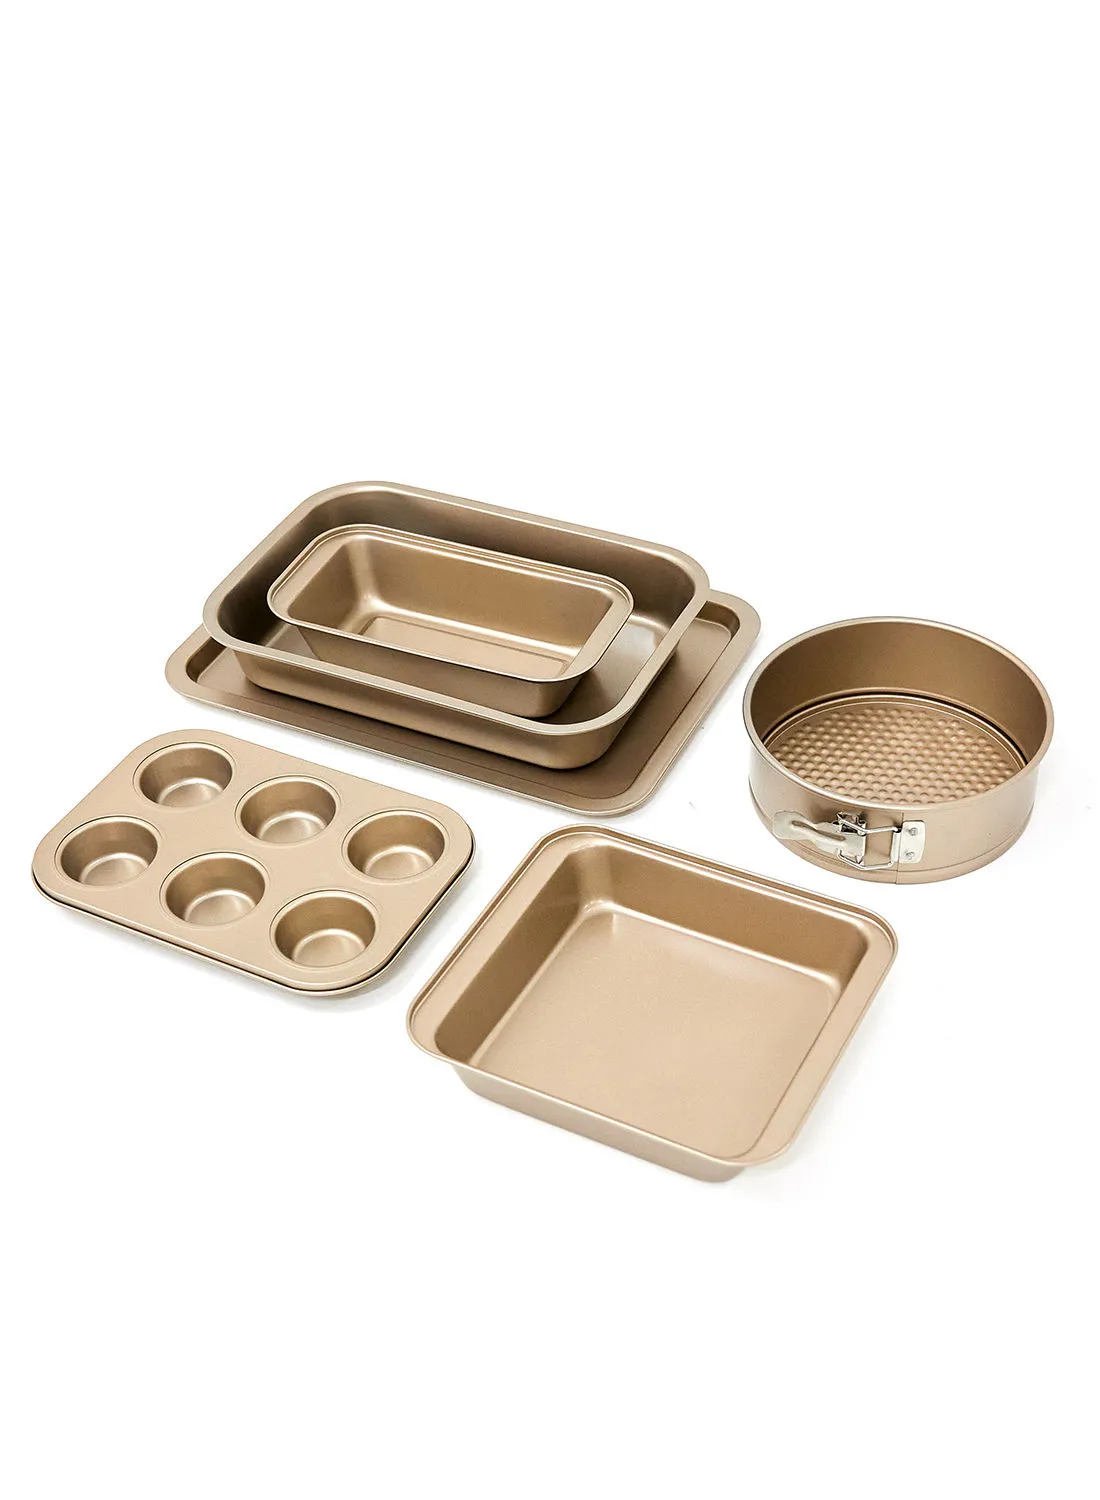 noon east 6 Piece Oven Pan Set - Made Of Carbon Steel - Baking Pan - Oven Trays - Cake Tray - Oven Pan - Cake Mold - Rose Gold